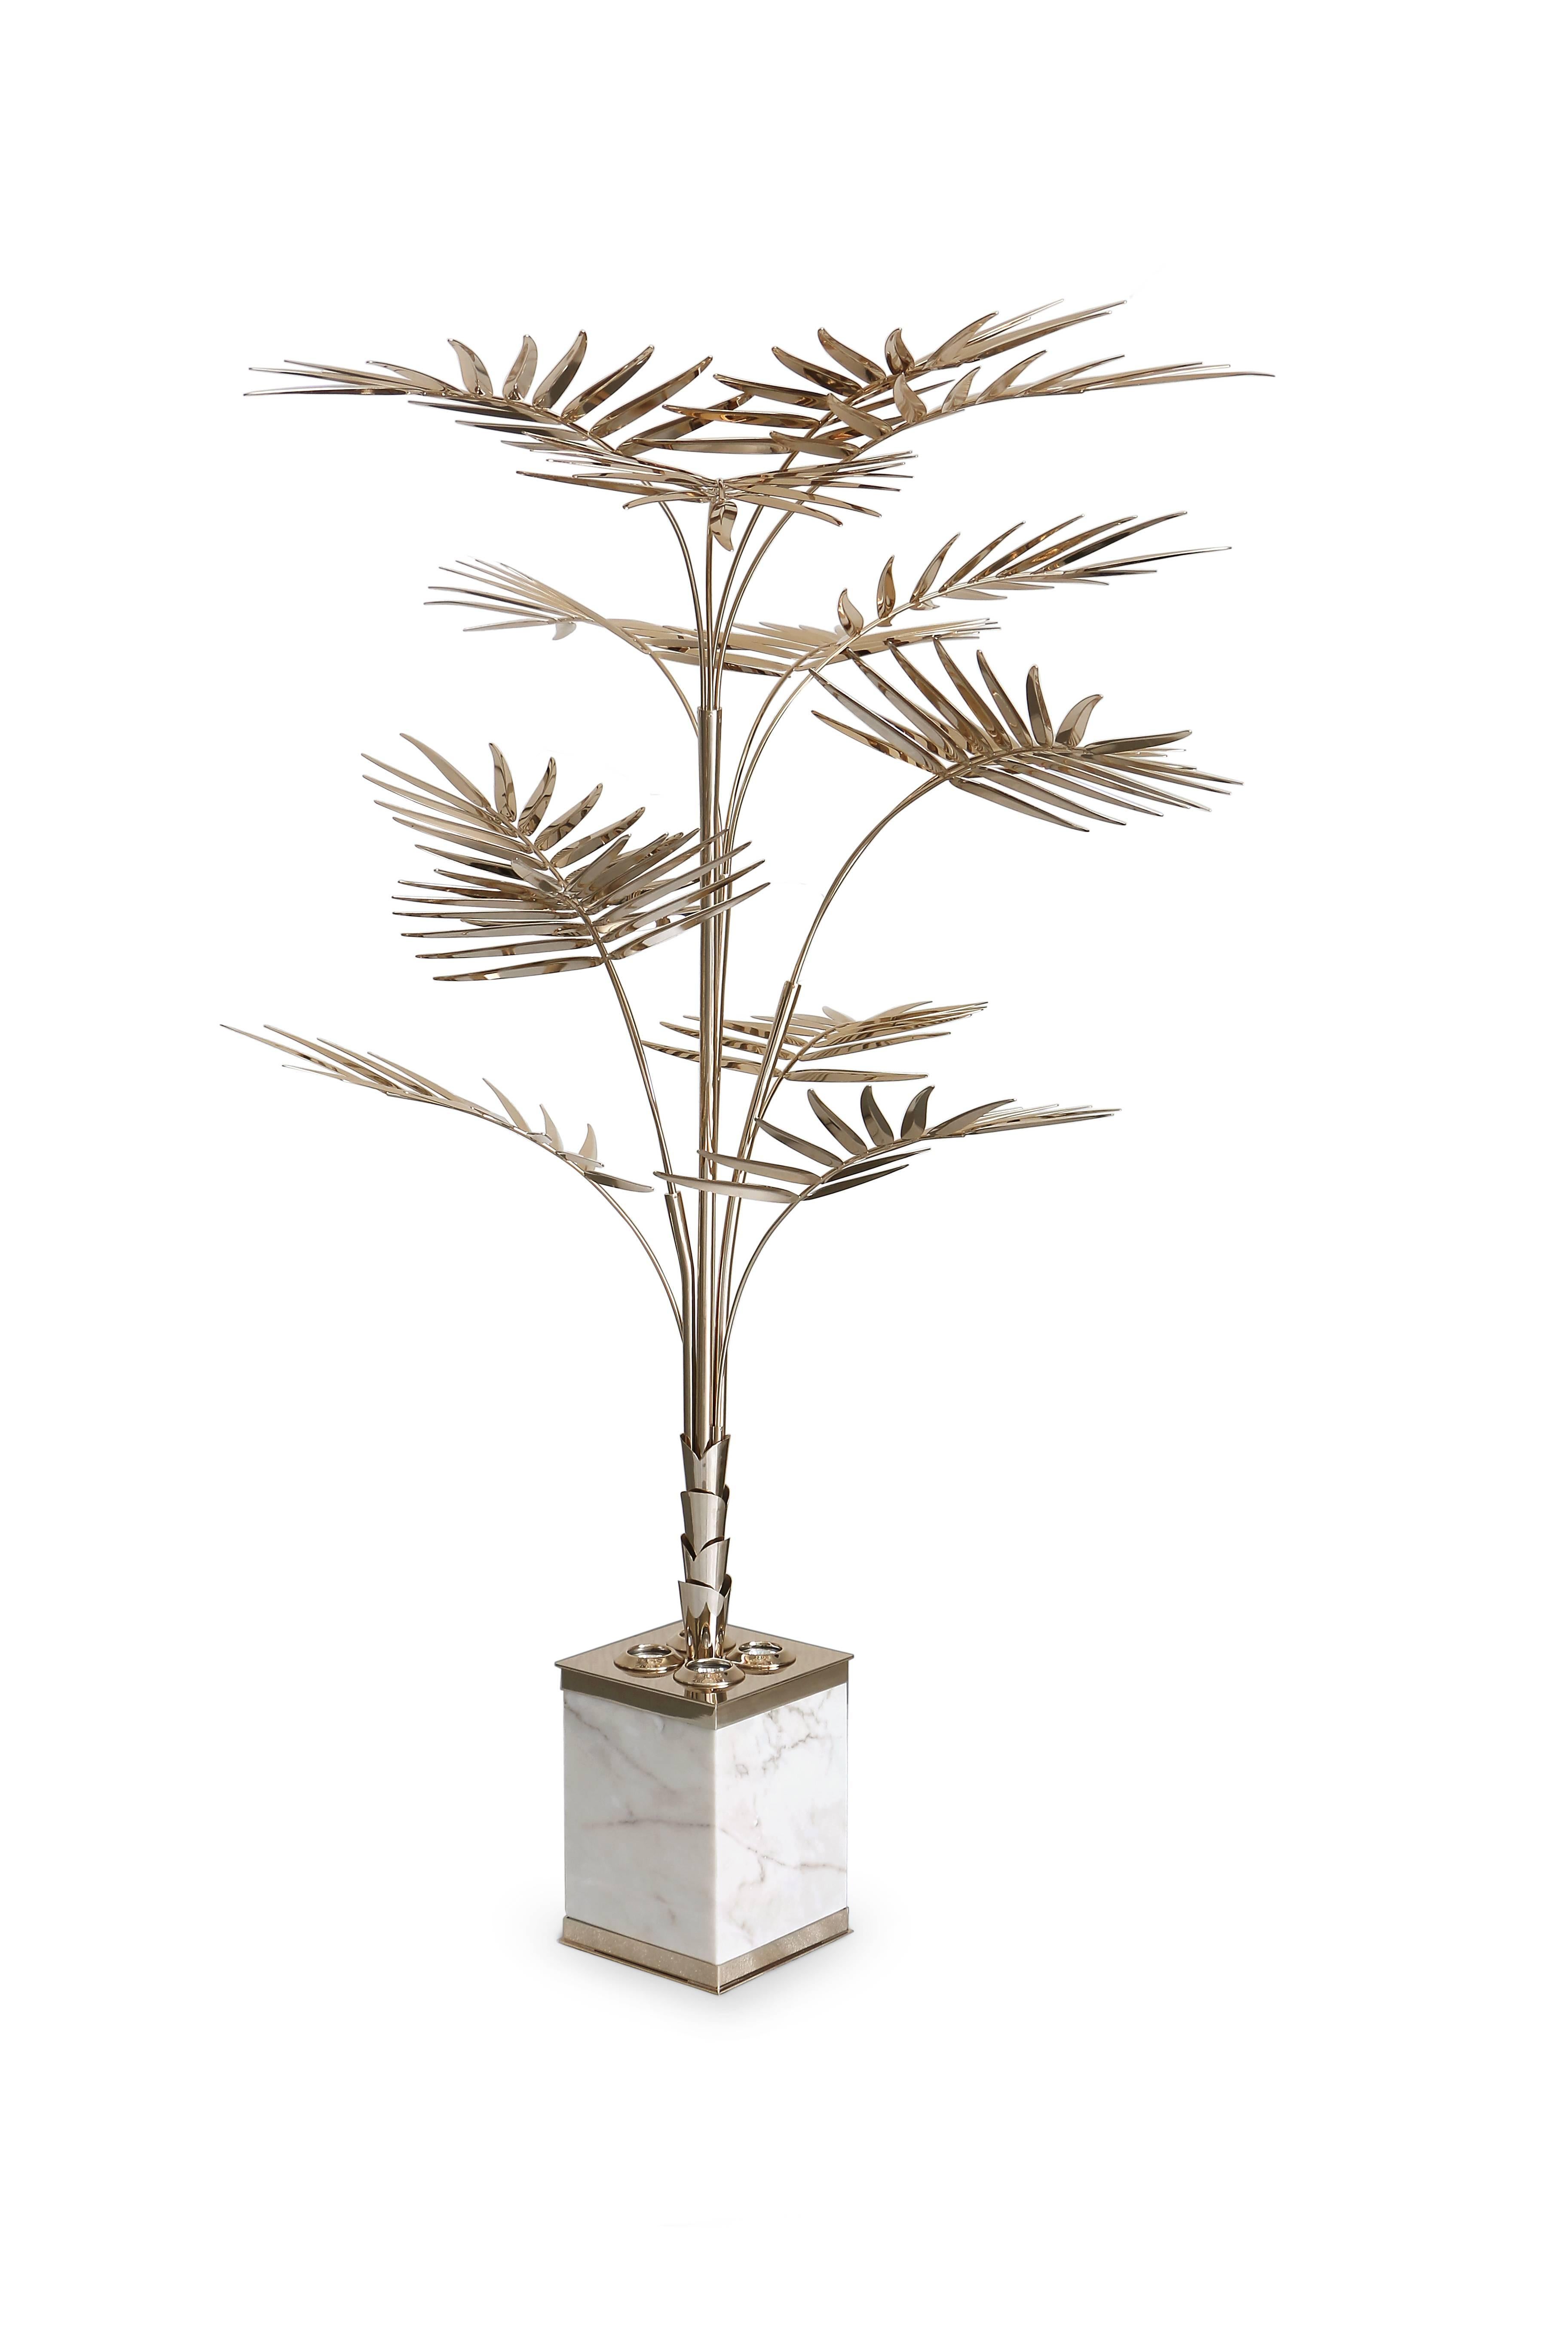 Ivete Sangalo is the tropical muse of Brazilian pop culture and was also the inspiration behind this exotic light fixture. Using a mixture of materials such as brass and marble, this unique light fixture can serve as table lamp or a floor lamp.